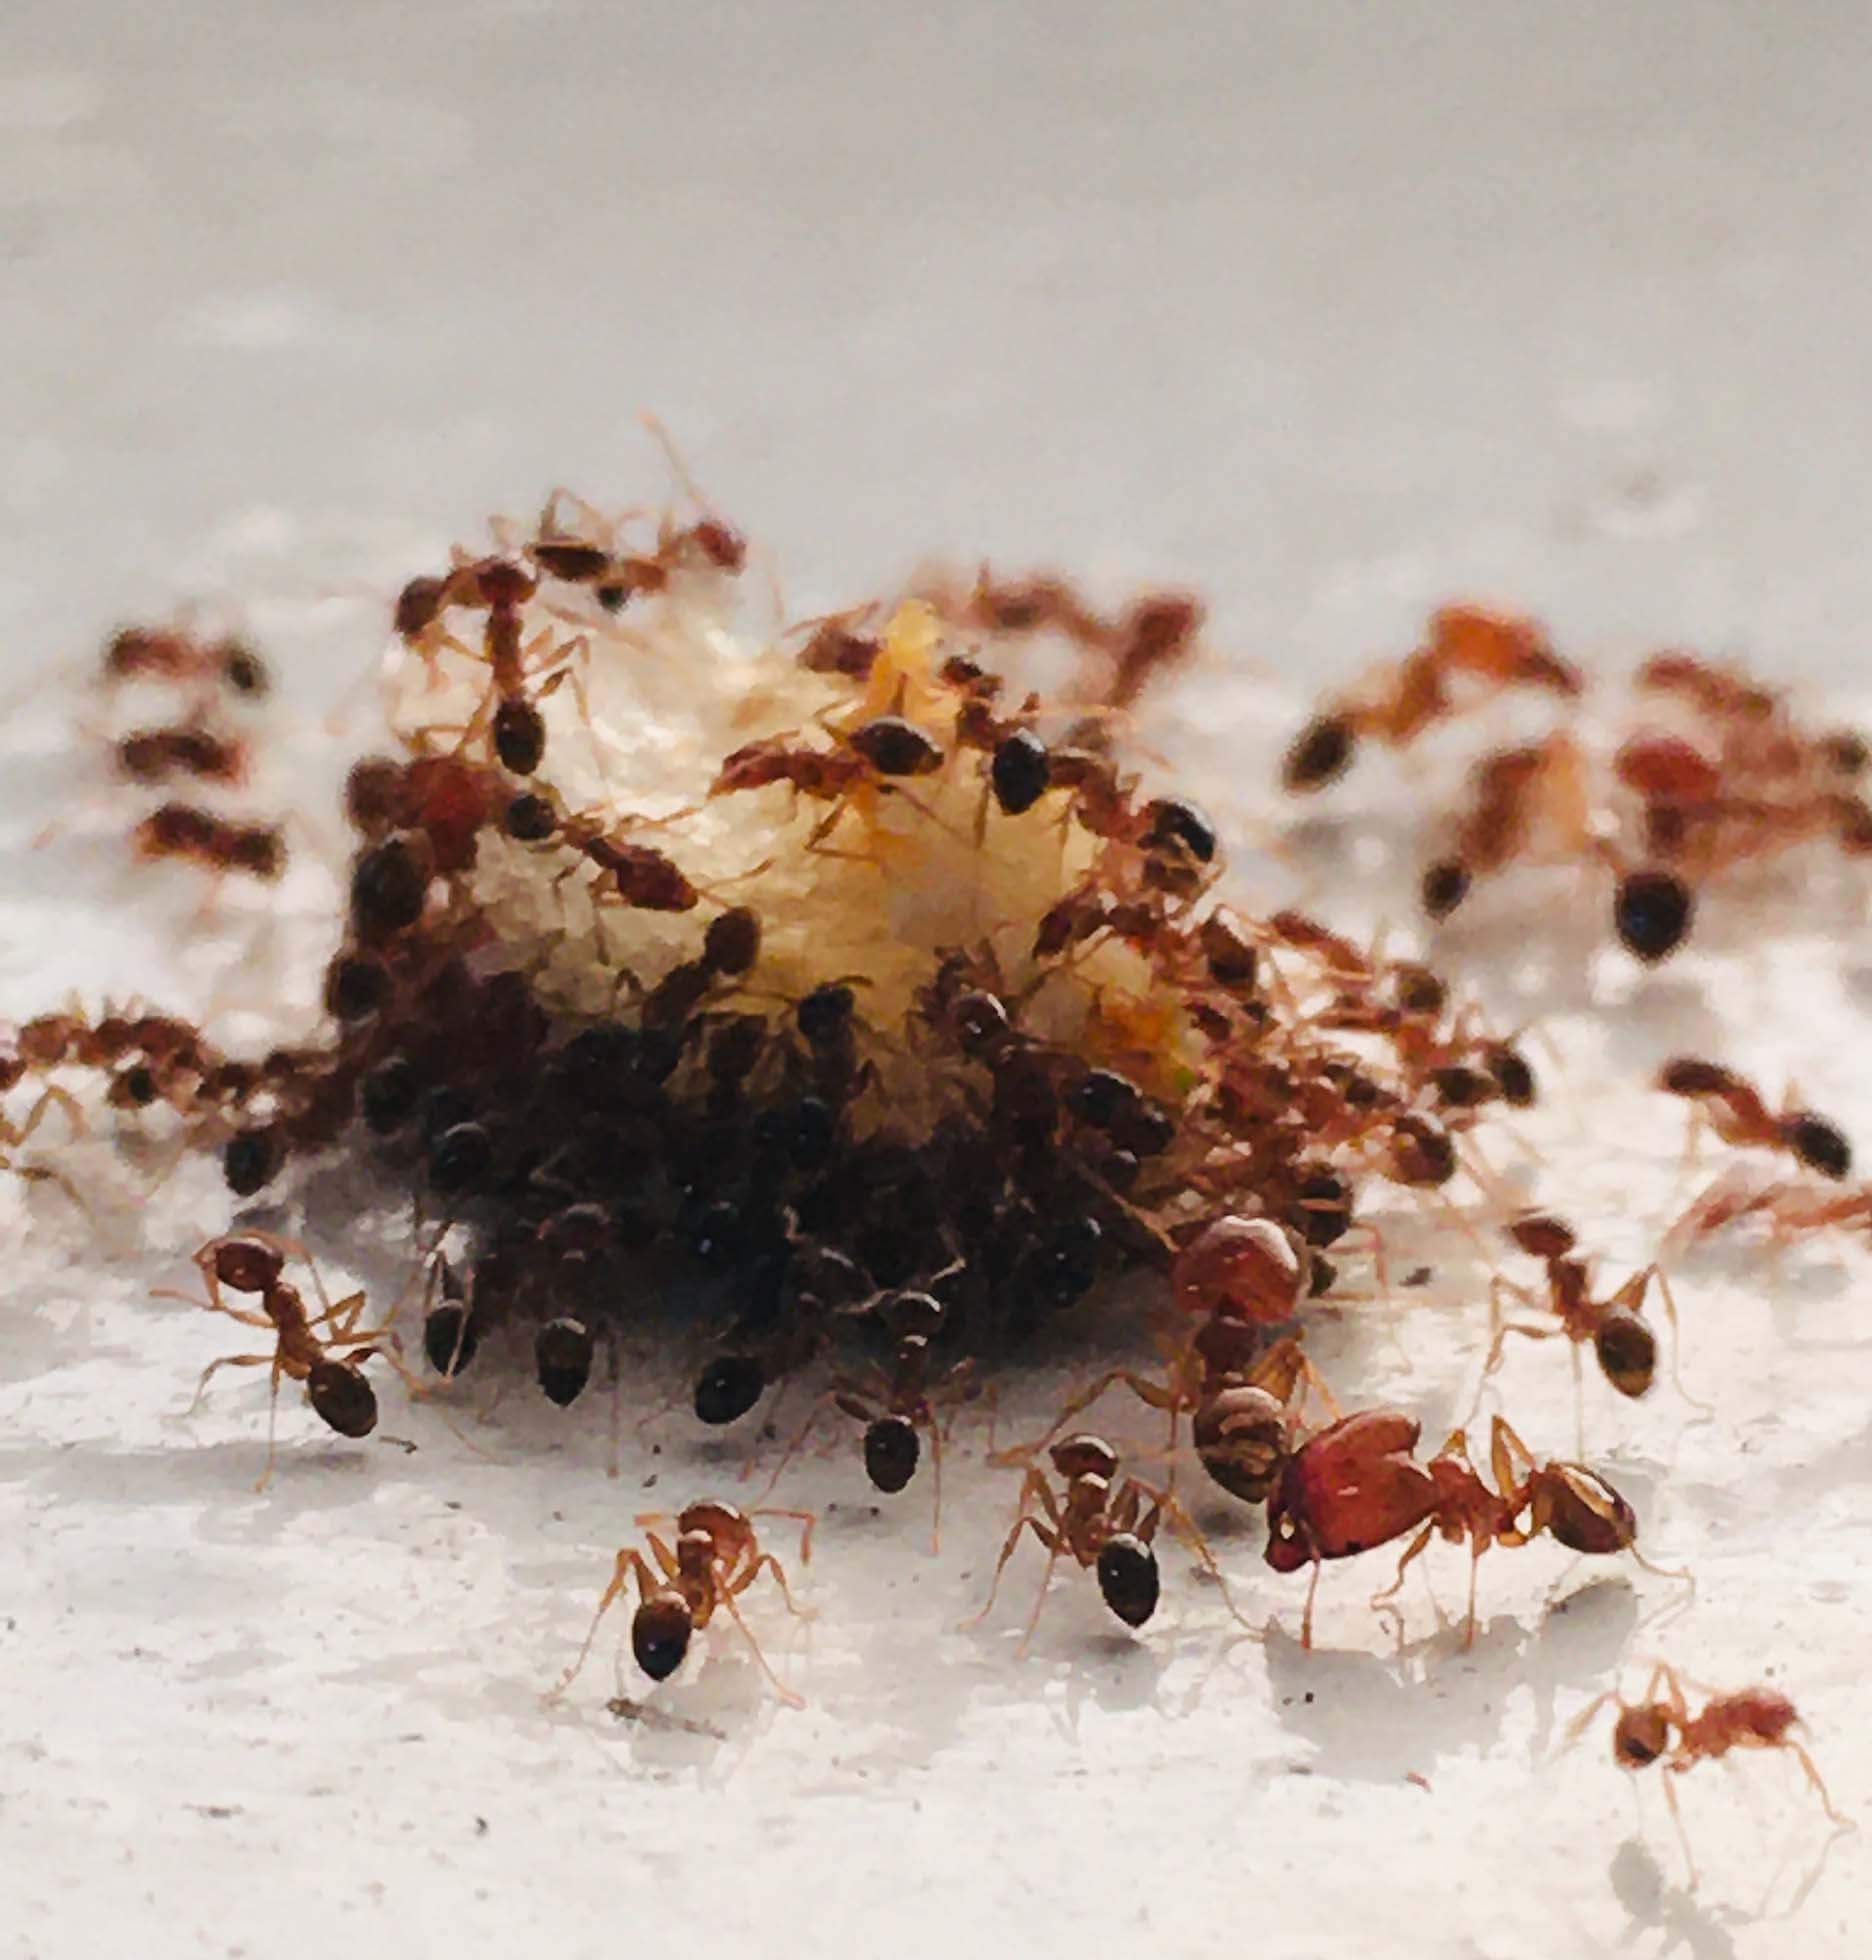 How to get rid of ants in kitchen and home